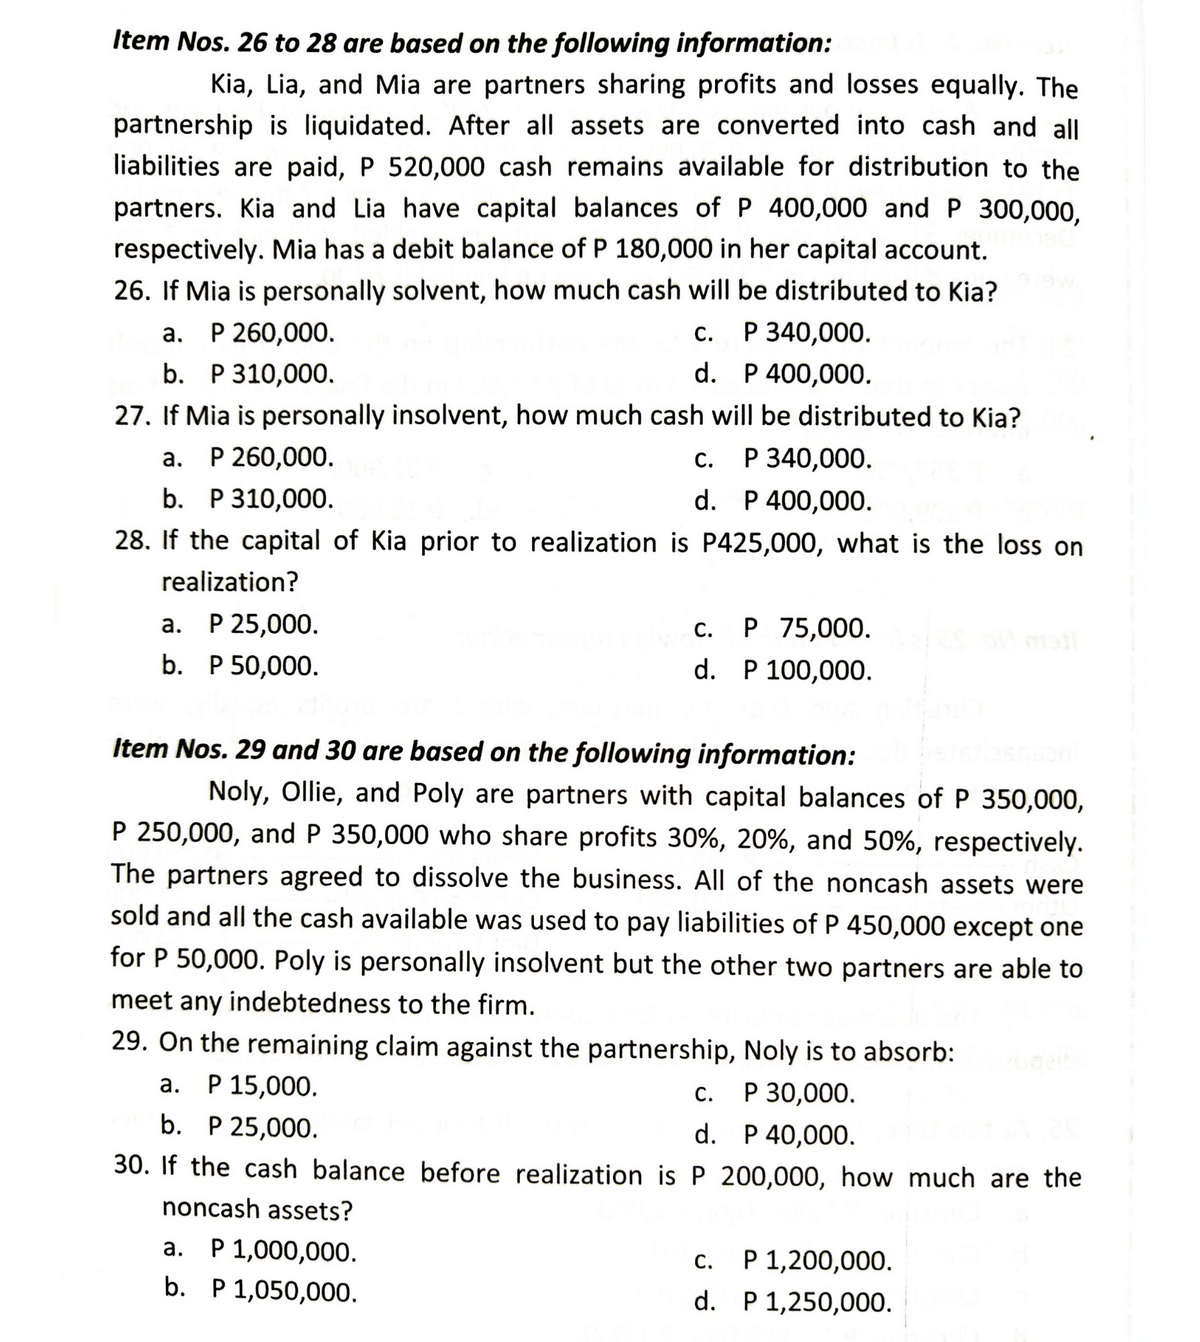 Item Nos. 26 to 28 are based on the following information:
Kia, Lia, and Mia are partners sharing profits and losses equally. The
partnership is liquidated. After all assets are converted into cash and all
liabilities are paid, P 520,000 cash remains available for distribution to the
partners. Kia and Lia have capital balances of P 400,000 and P 300,000,
respectively. Mia has a debit balance of P 180,000 in her capital account.
26. If Mia is personally solvent, how much cash will be distributed to Kia?
P 340,000.
a. P 260,000.
C.
b. P 310,000.
d.
P 400,000.
27. If Mia is personally insolvent, how much cash will be distributed to Kia?
a. P 260,000.
c. P 340,000.
b. P 310,000.
d.
P 400,000.
28. If the capital of Kia prior to realization is P425,000, what is the loss on
realization?
a. P 25,000.
Pplw-C.
c. P 75,000.
d. P 100,000.
b. P 50,000.
Item Nos. 29 and 30 are based on the following information:
Noly, Ollie, and Poly are partners with capital balances of P 350,000,
P 250,000, and P 350,000 who share profits 30%, 20%, and 50%, respectively.
The partners agreed to dissolve the business. All of the noncash assets were
sold and all the cash available was used to pay liabilities of P 450,000 except one
for P 50,000. Poly is personally insolvent but the other two partners are able to
meet any indebtedness to the firm.
29. On the remaining claim against the partnership, Noly is to absorb:
a. P 15,000.
C. P 30,000.
b. P 25,000.
d. P 40,000.
30. If the cash balance before realization is P 200,000, how much are the
noncash assets?
a.
P 1,000,000.
c.
P 1,200,000.
b. P 1,050,000.
d.
P 1,250,000.